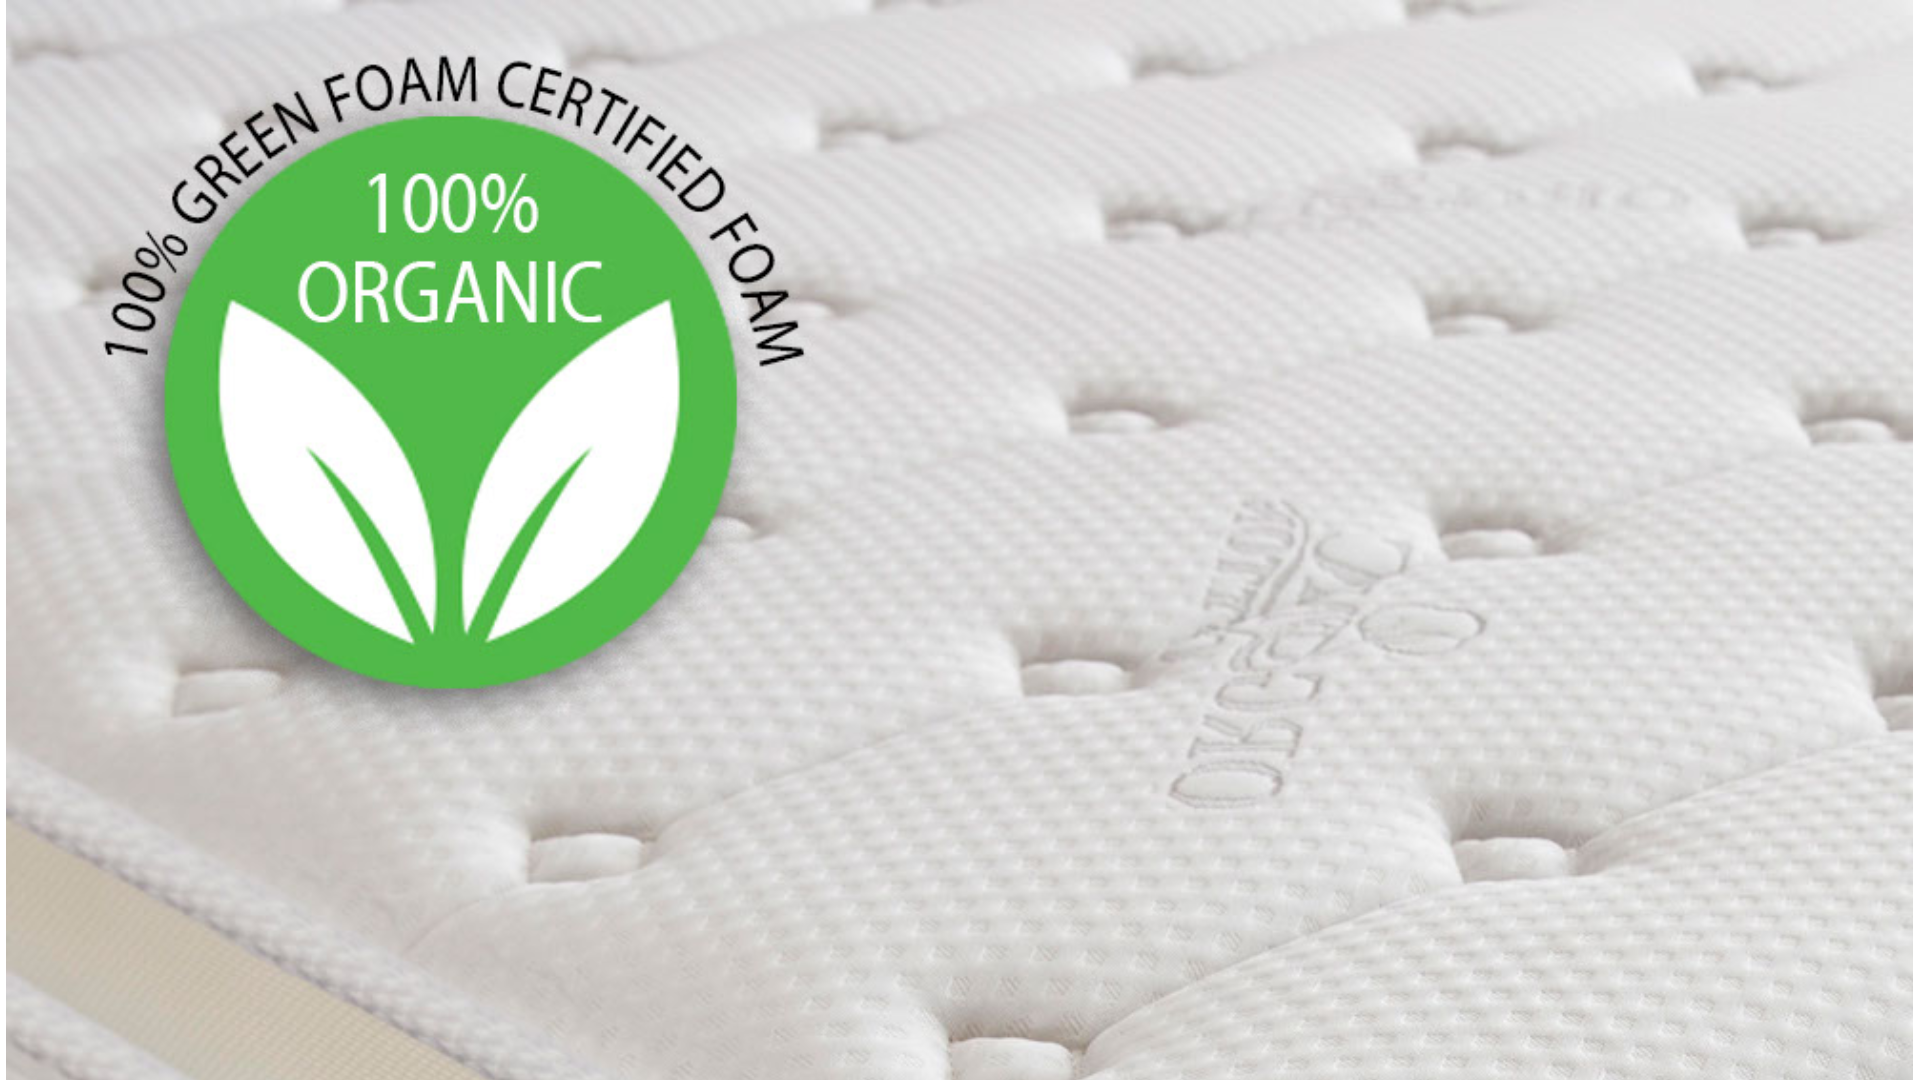 THE SUPER LUX - 14" - "THE PERFECT" Medium Plush - Cool Memory Foam & Spring Hybrid Mattress with Breathable Cover